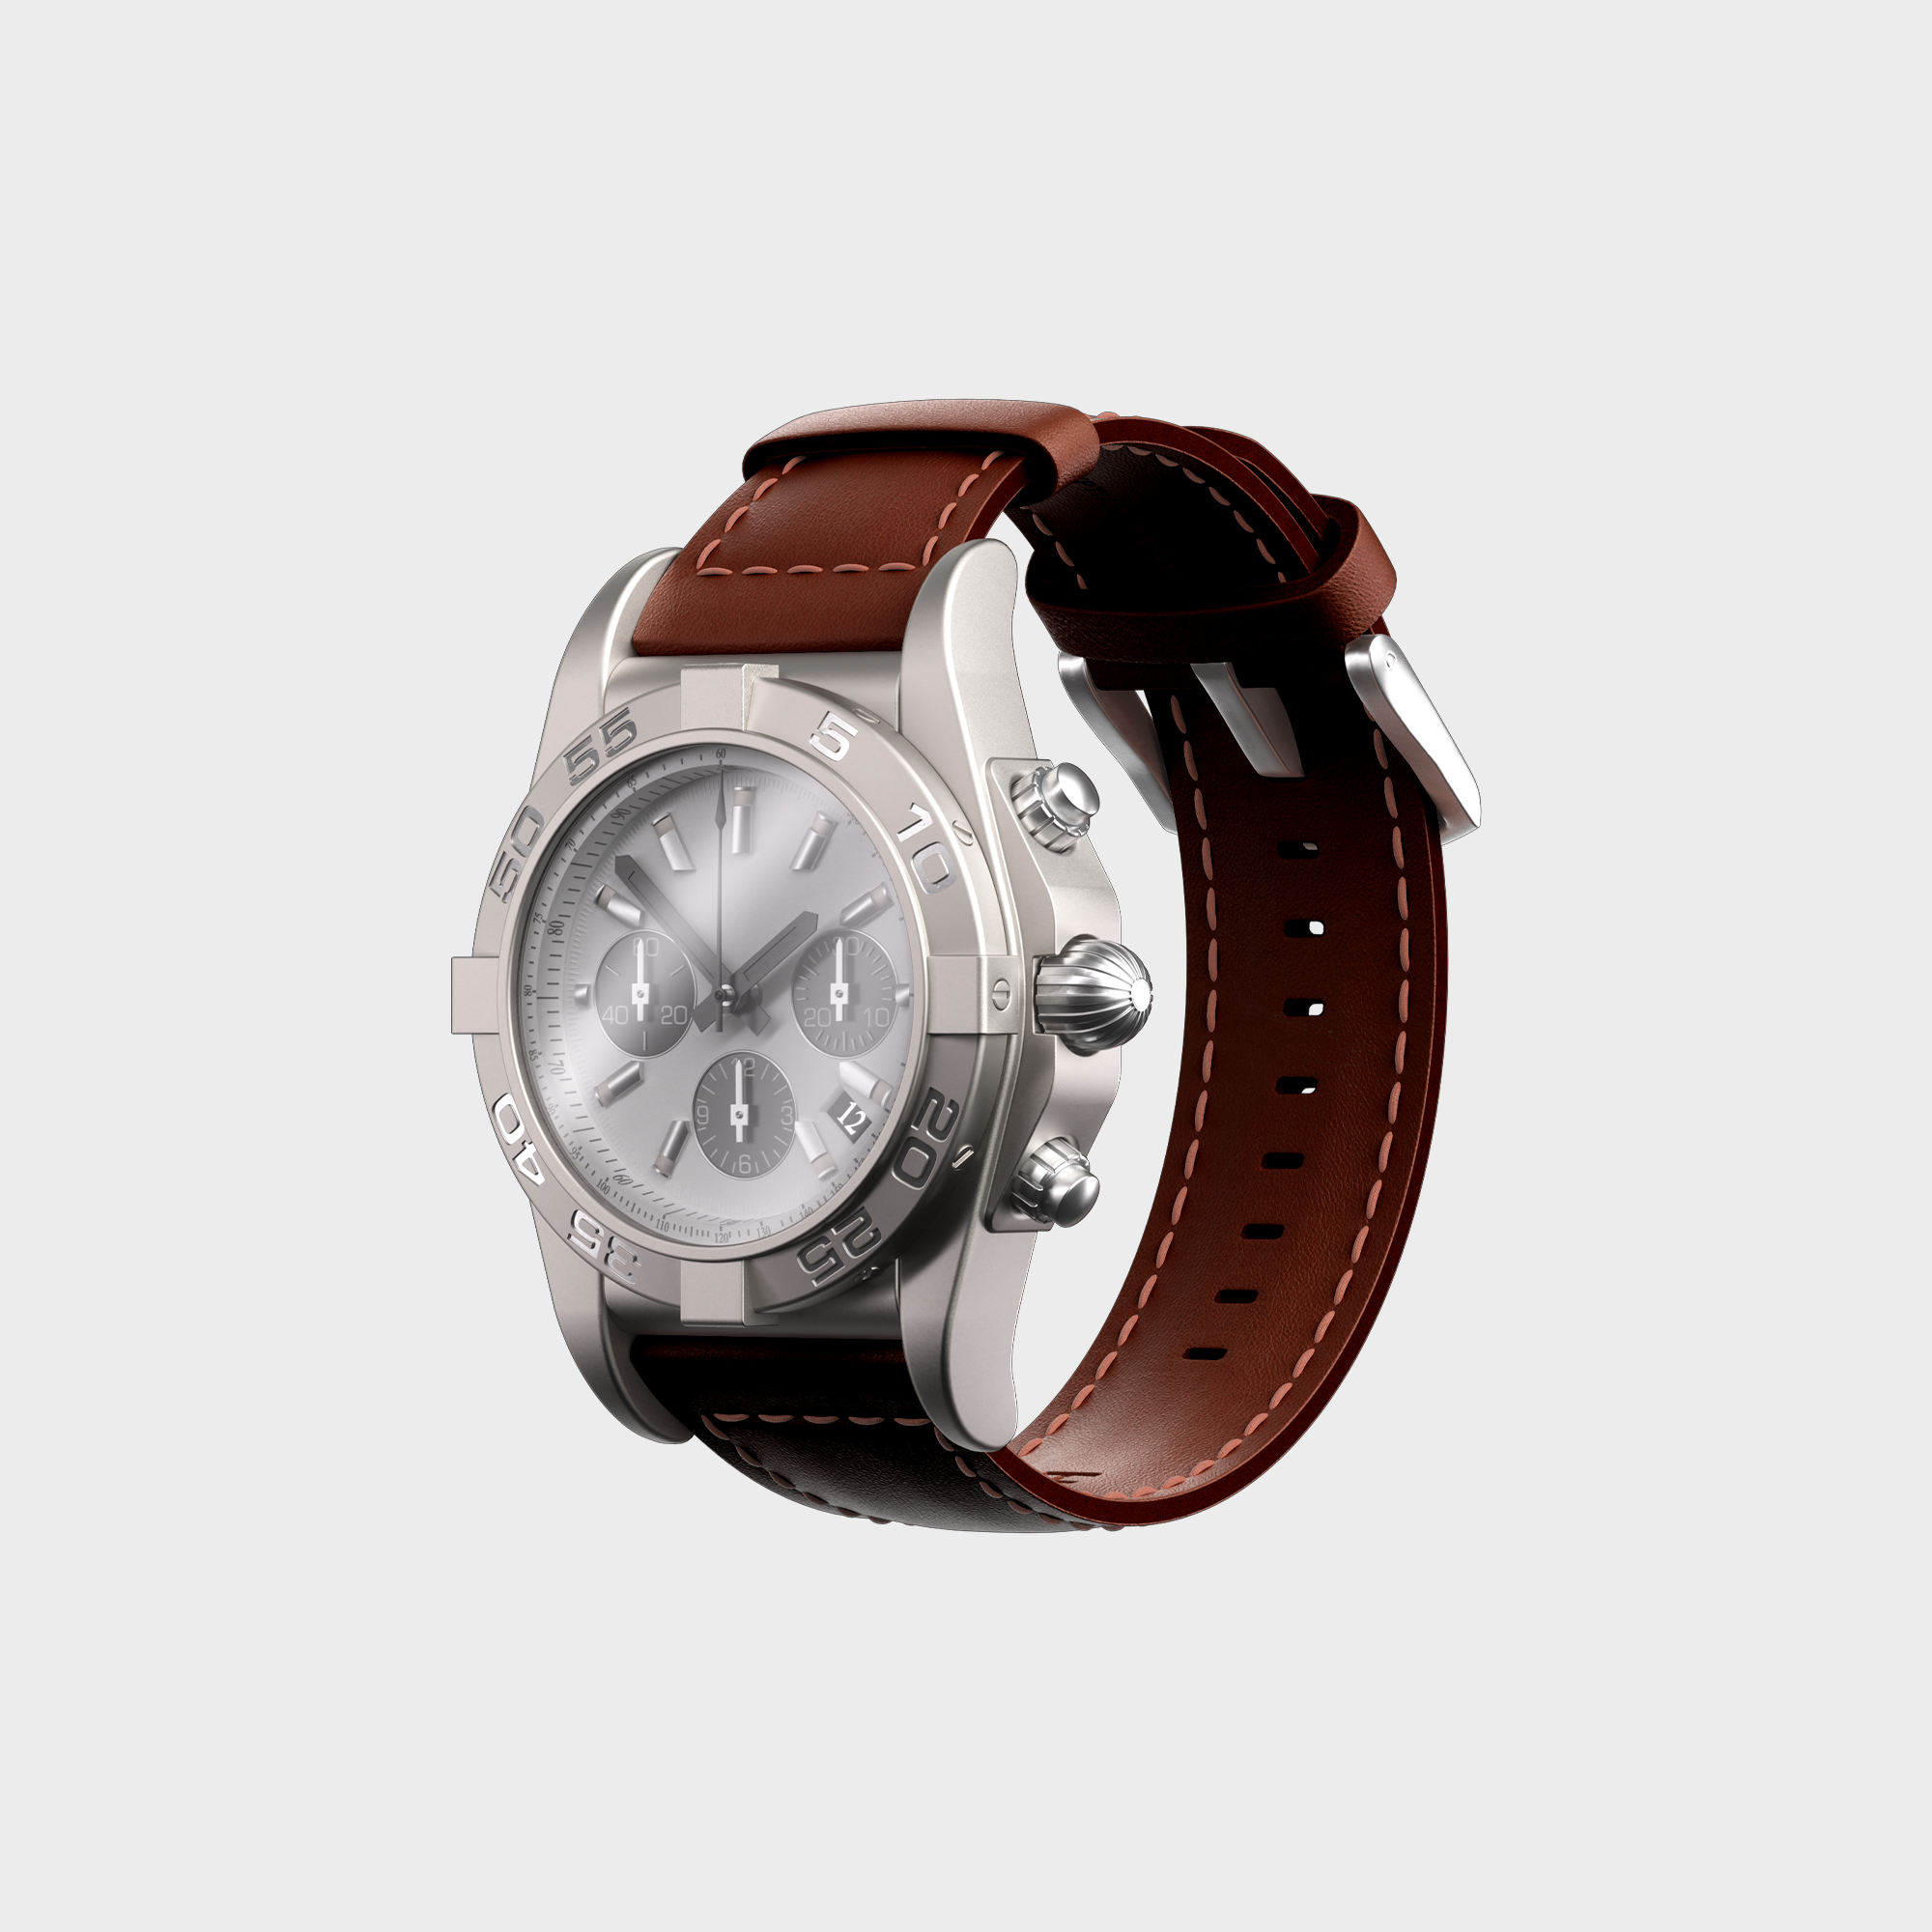 Luxury stainless steel chronograph watch with brown leather strap on a white background.